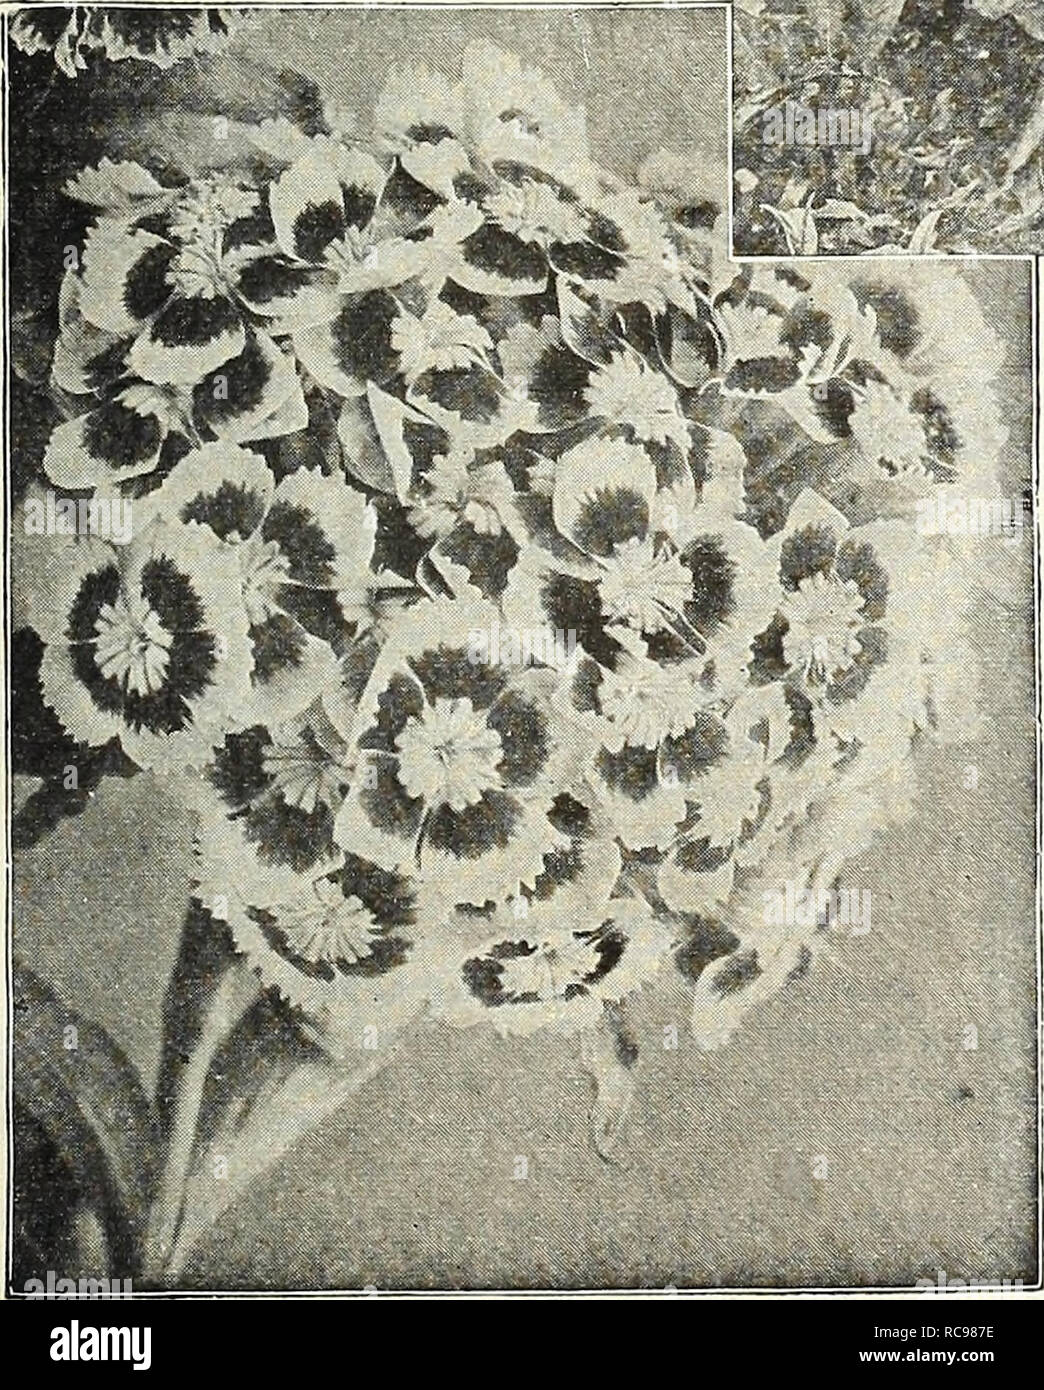 . Dreer's garden book 1924. Seeds Catalogs; Nursery stock Catalogs; Gardening Equipment and supplies Catalogs; Flowers Seeds Catalogs; Vegetables Seeds Catalogs; Fruit Seeds Catalogs. /flEHiyAJREEPu^ HARDY PERENNIAL PIANTS &gt;HiLaiEiiPmik 195 SISYRINCHIUM (Satin Lily or Blue-eyed Grass) Bermudianum. A pretty early spring and fall-flowering plant with blue flowers and grass-like foliage. 25 cts. each; $2.50 per doz. STACHYS (Woundwort) Betonica Grandiflora (Betony). Large flowers of purplish-rose; June and July; 15 inches. 25 cts. each; $2.50 per doz. STAT ICE (Great Sea Lavender) Latifolia.  Stock Photo